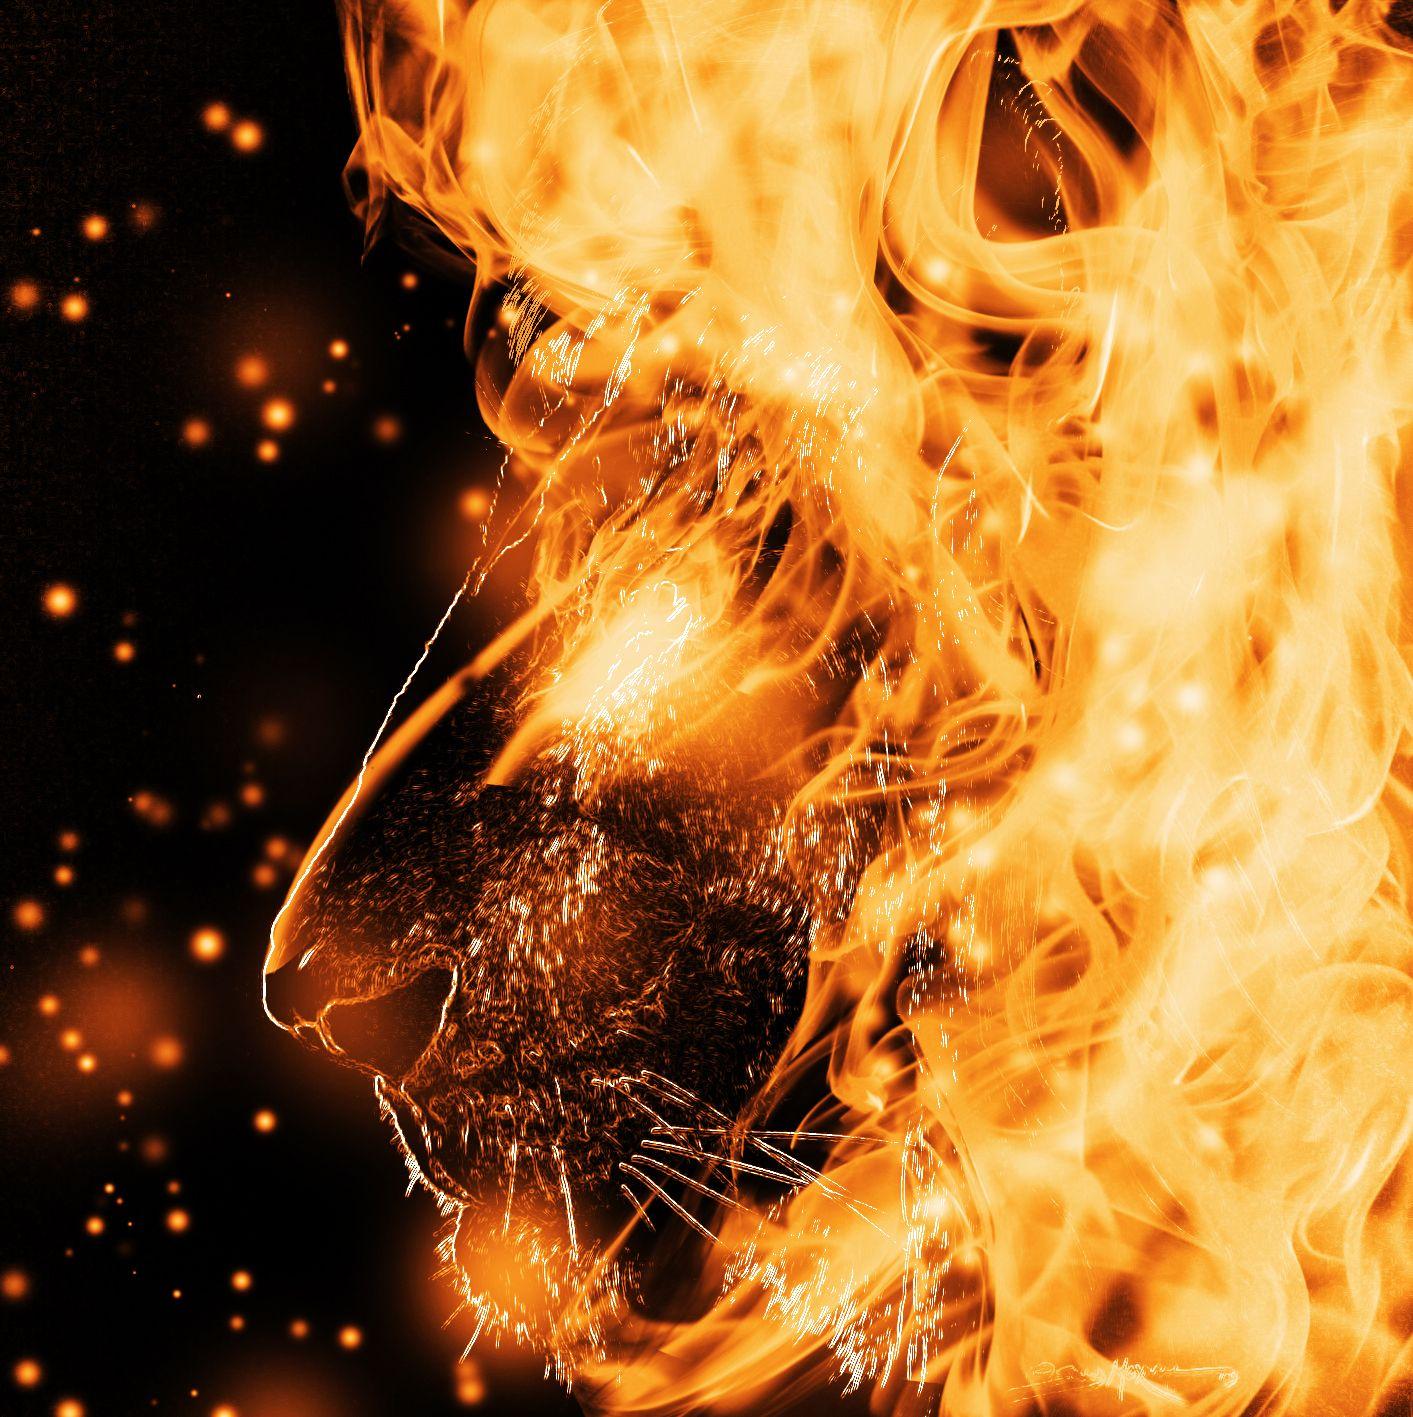 Fire Lion Wallpapers - Wallpaper Cave